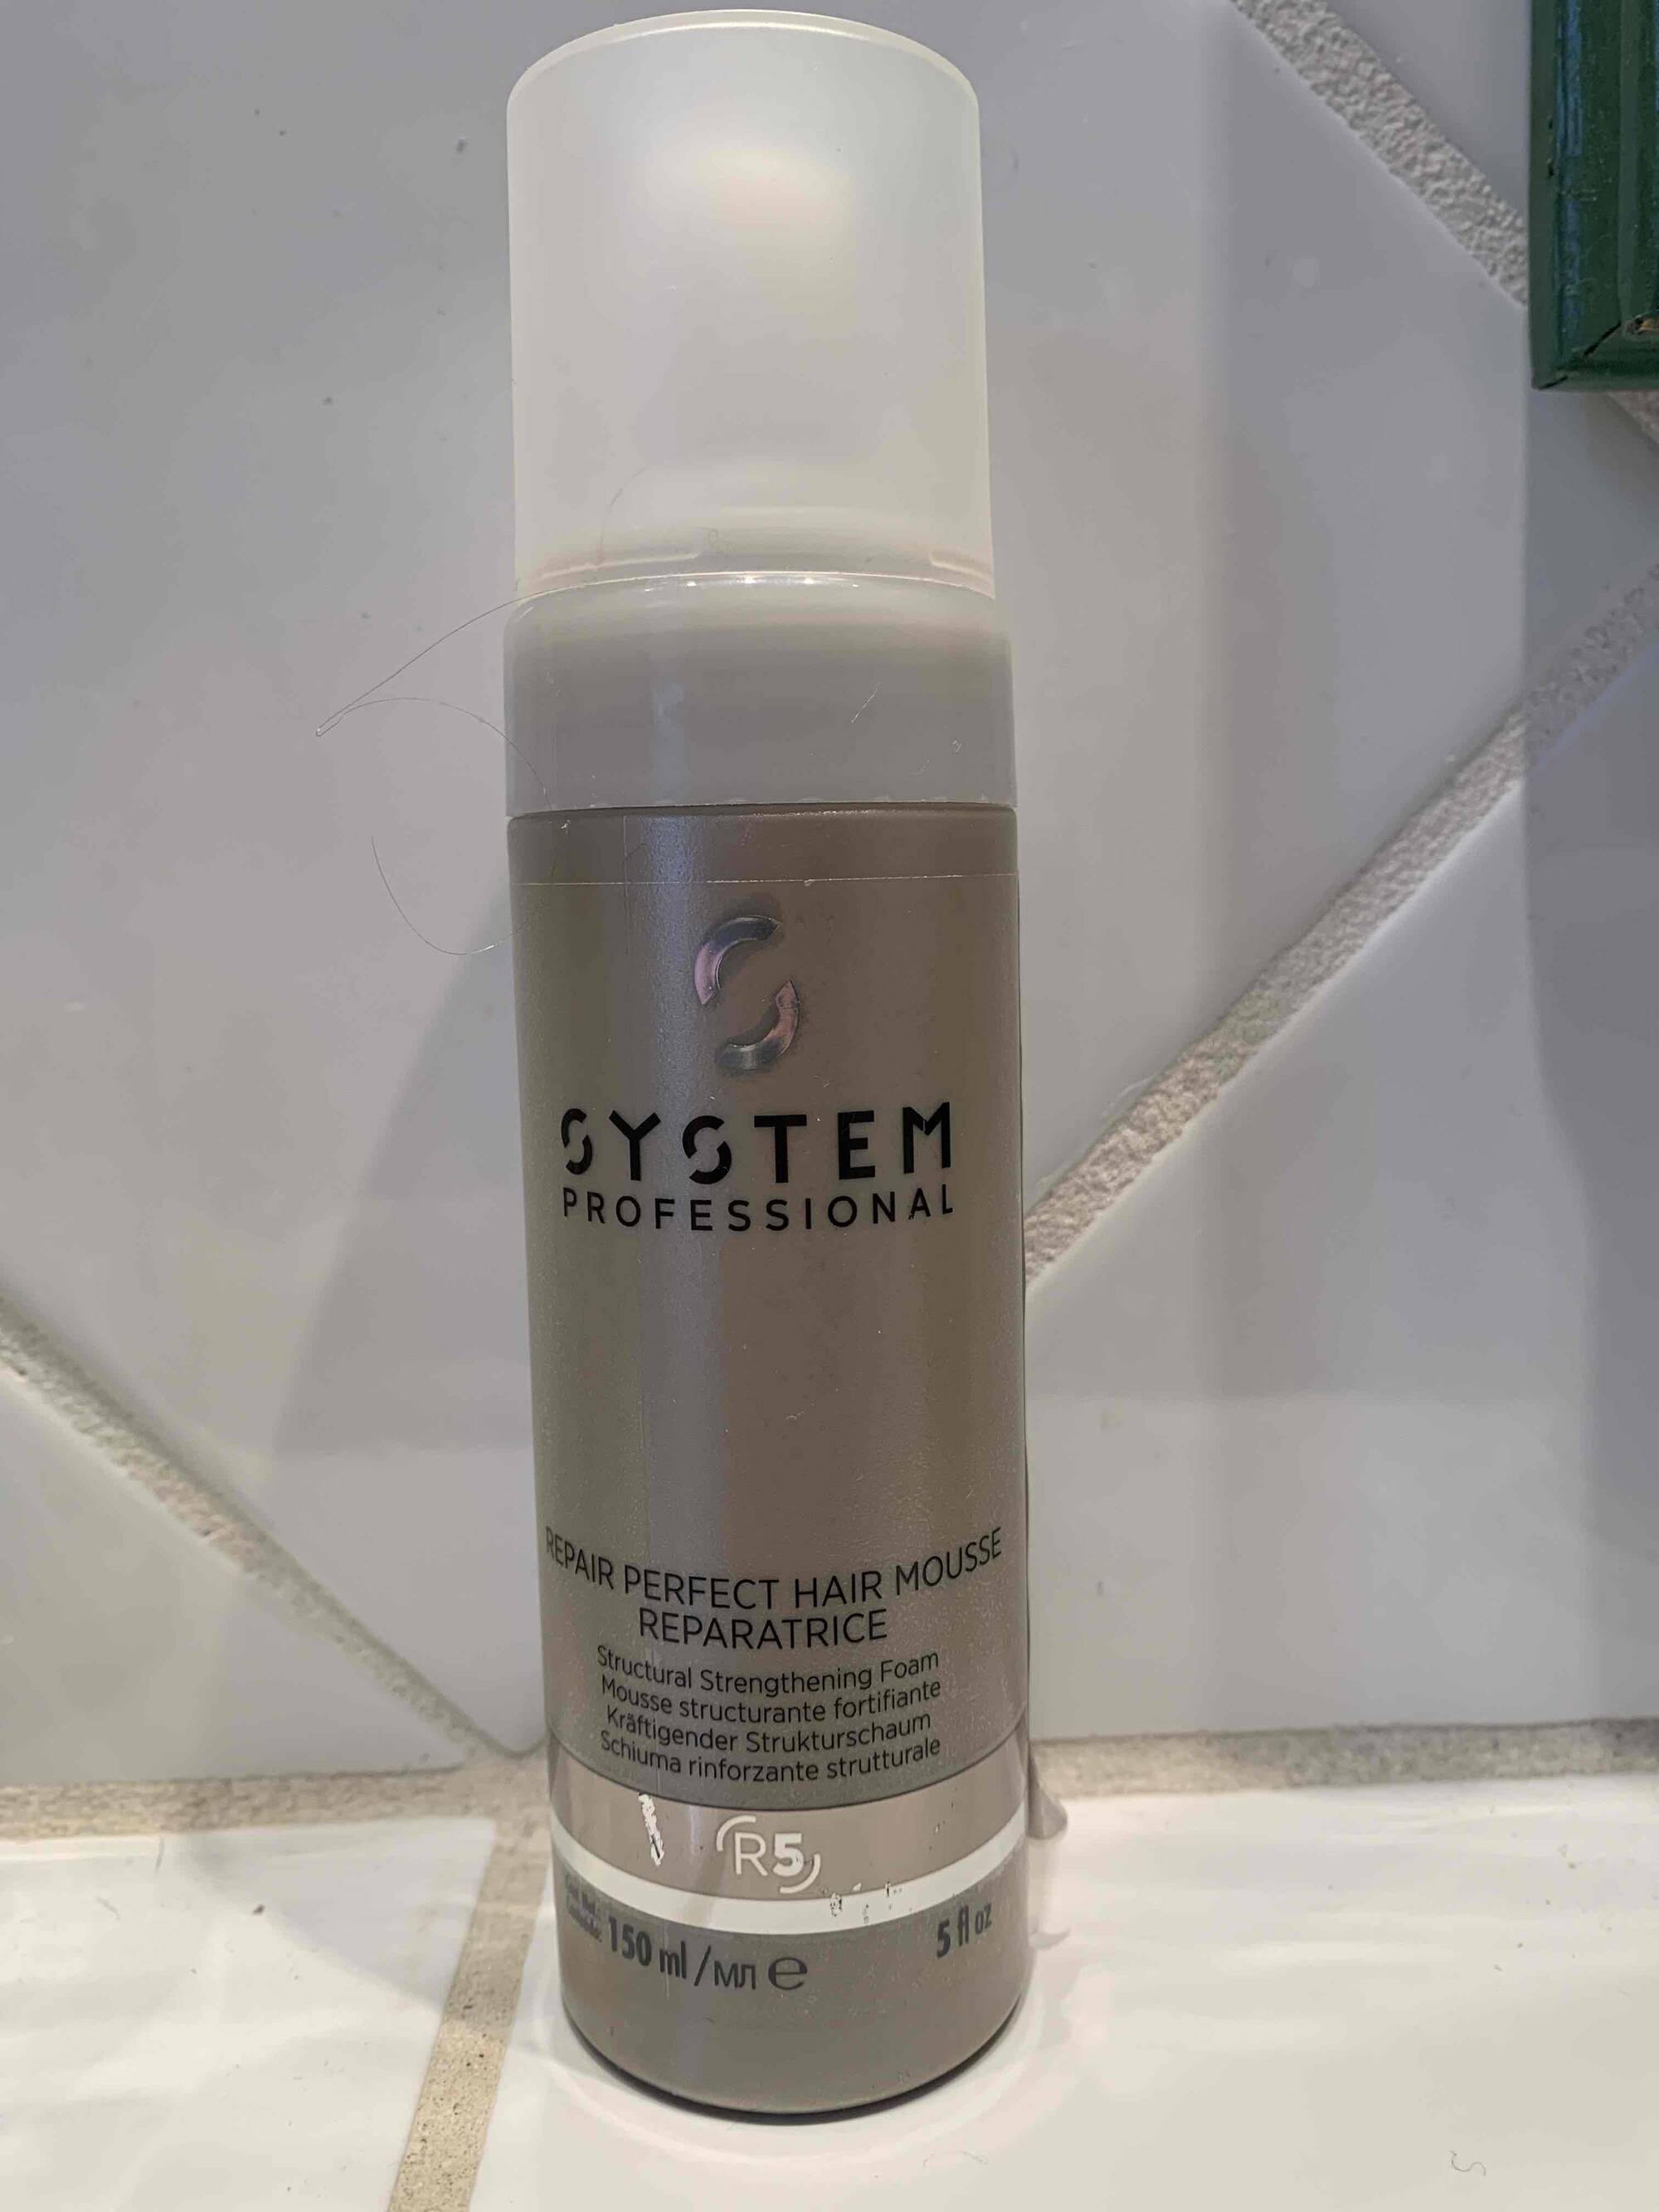 SYSTEM PROFESSIONAL - Repair perfect hair mousse